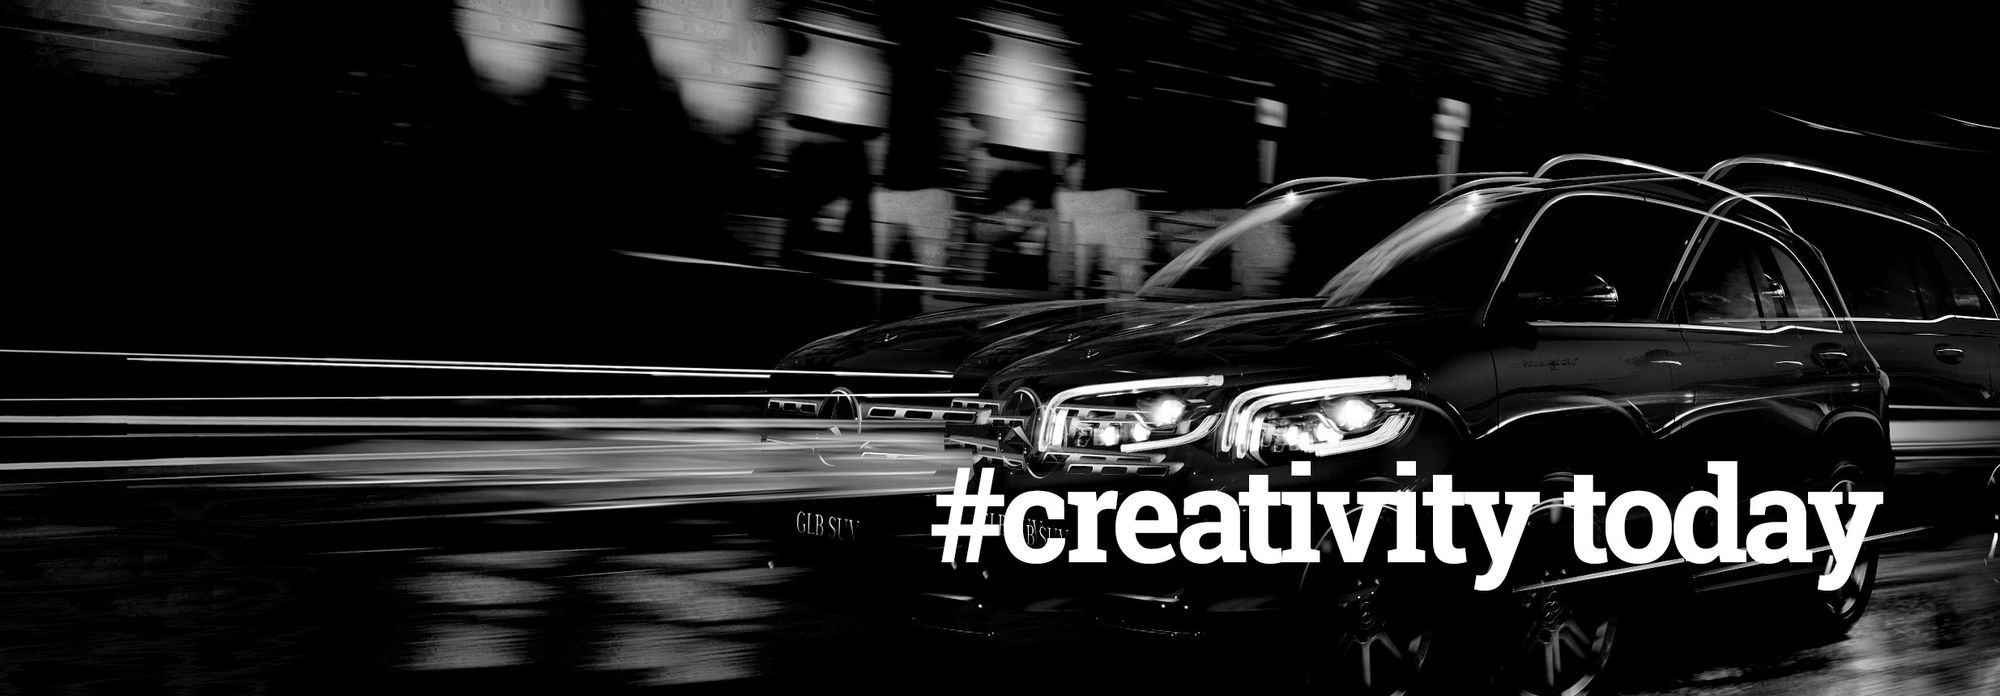 #creativitytoday - Interview with the  Creative Director from Ogilvy in Beijing